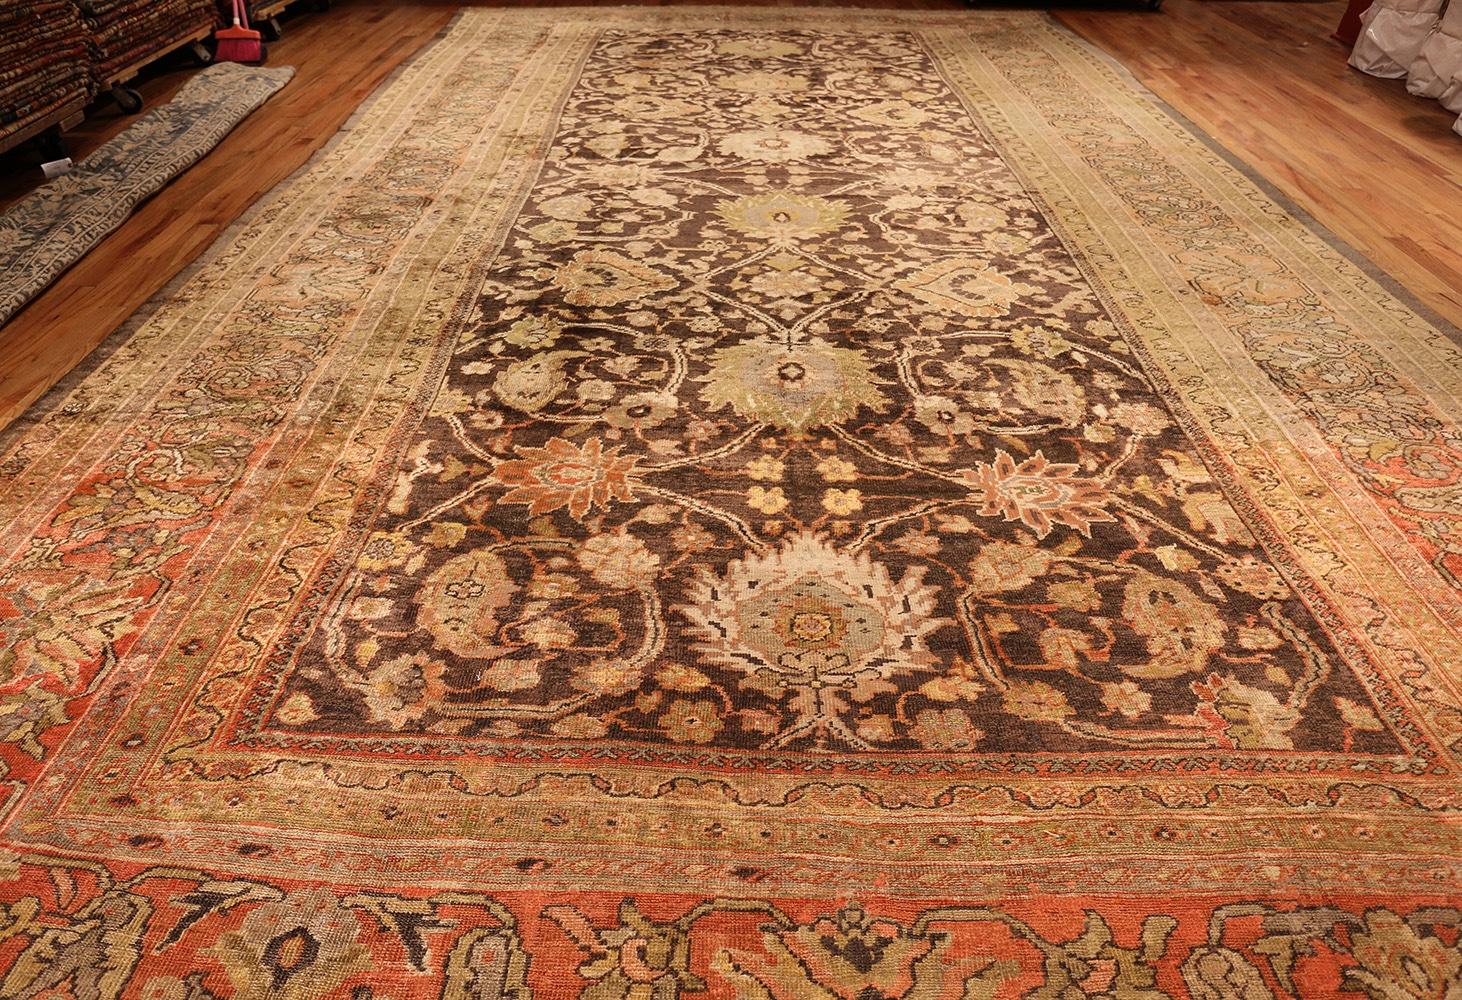 Beautiful and decorative earth tone oversized antique Persian Sultanabad rug, origin: Persia, circa late 19th century. Size: 12 ft x 21 ft 8 in (3.66 m x 6.6 m)

Warm corals and earthy browns work together to create this Persian antique Sultanabad